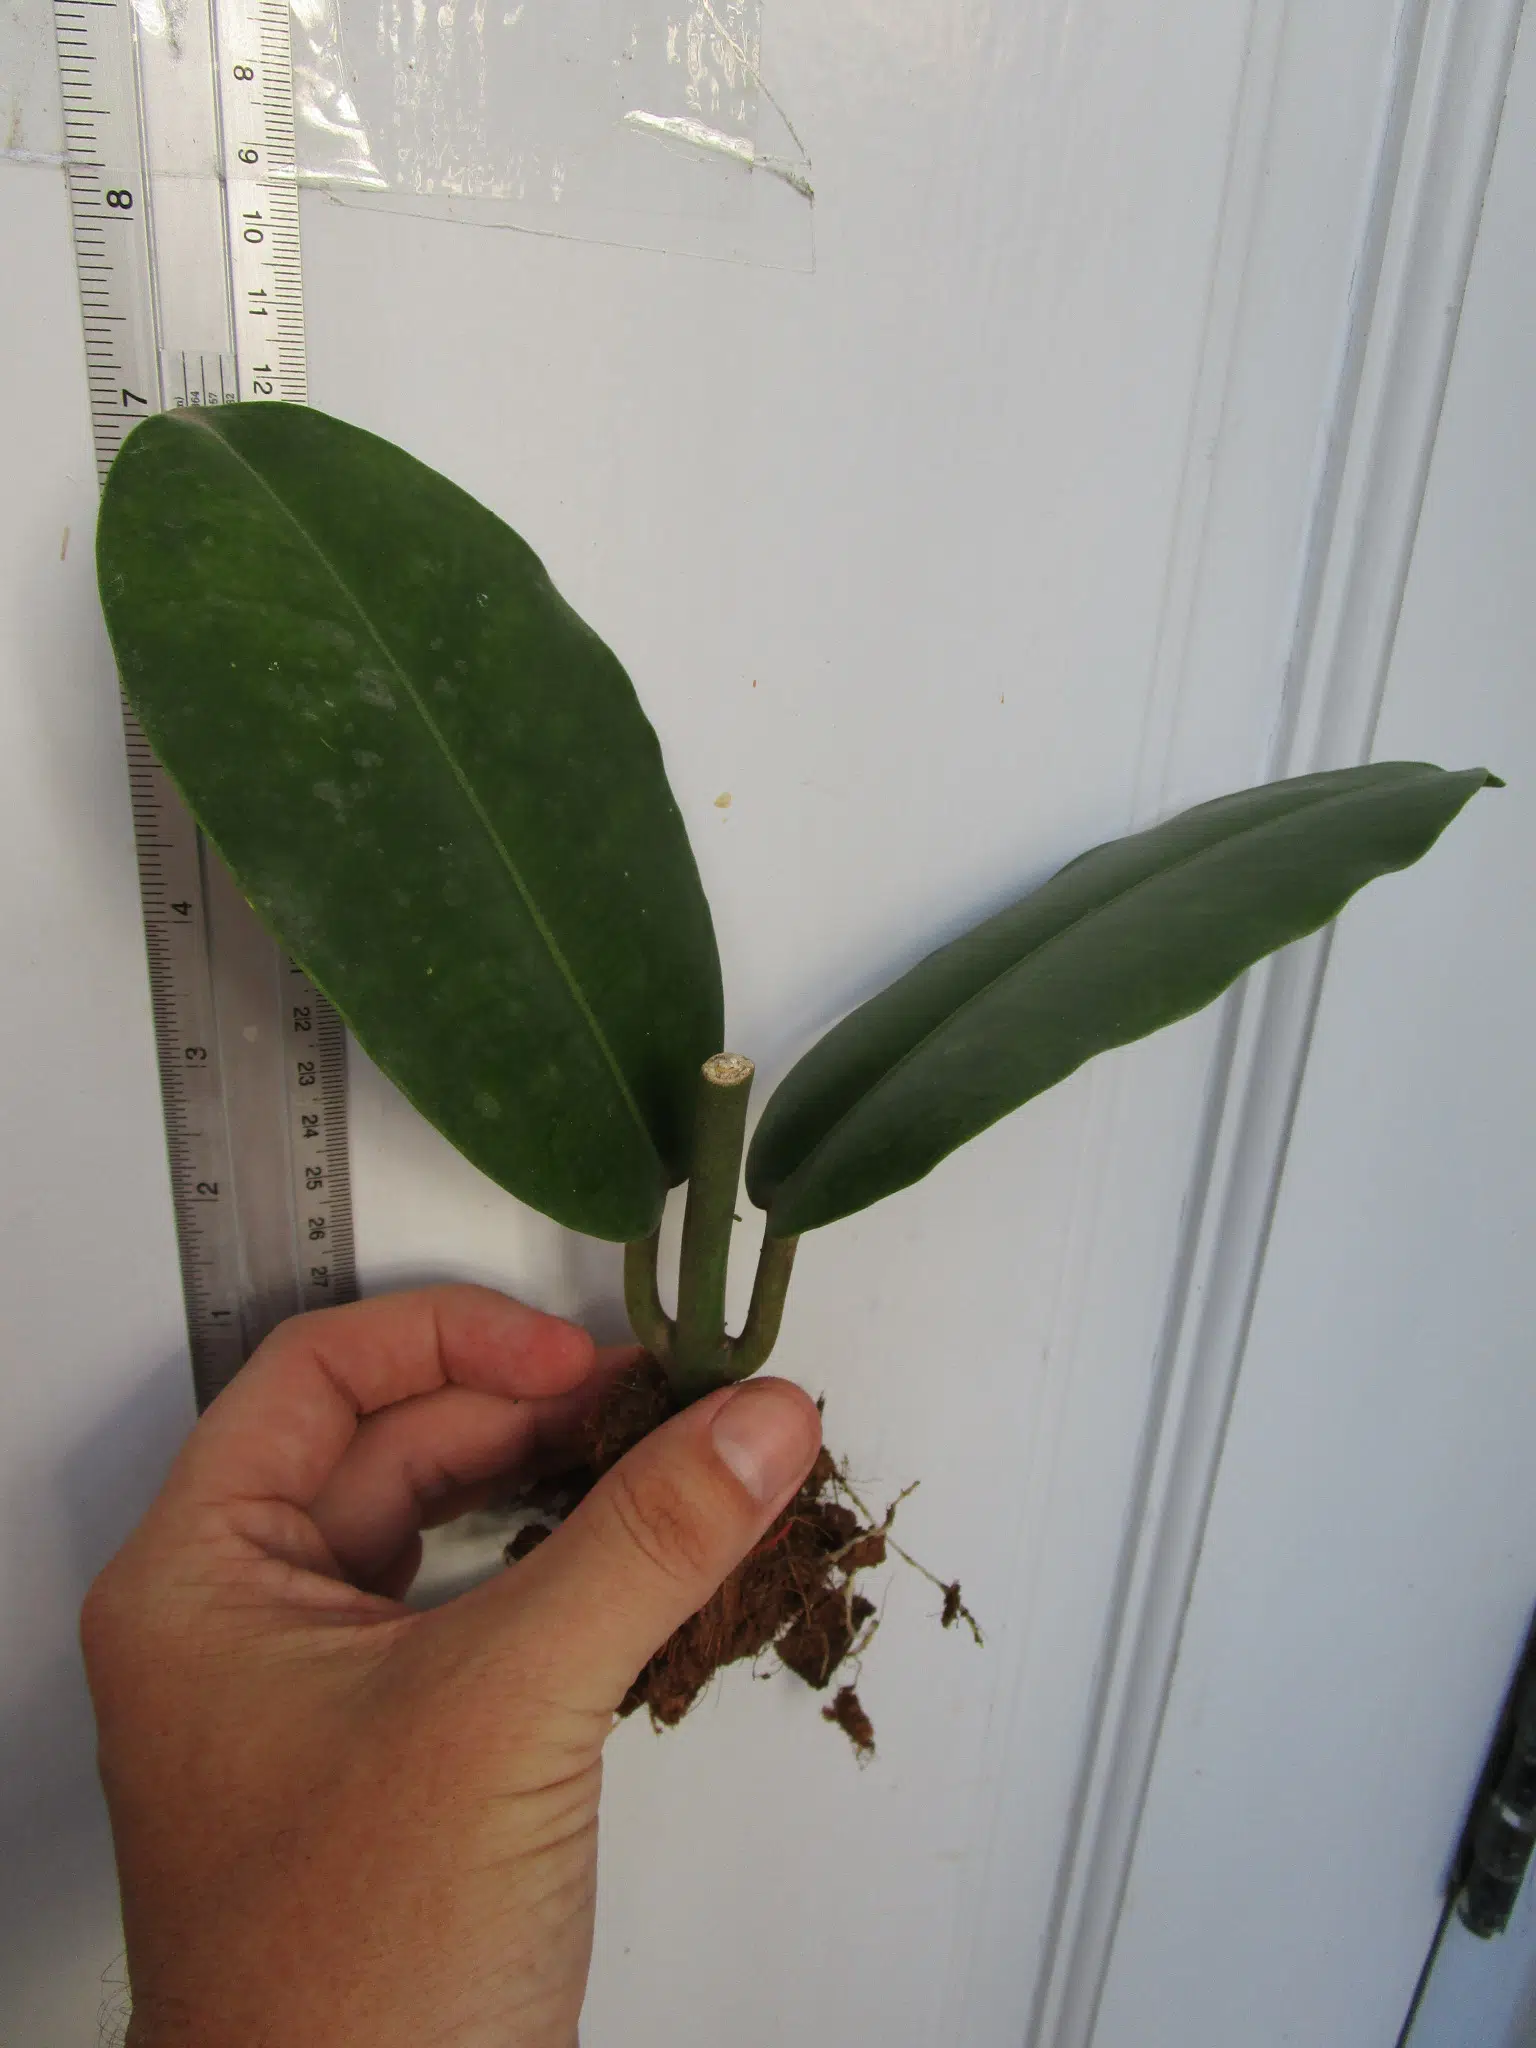 Hoya imperialis rooted cuttings for sale